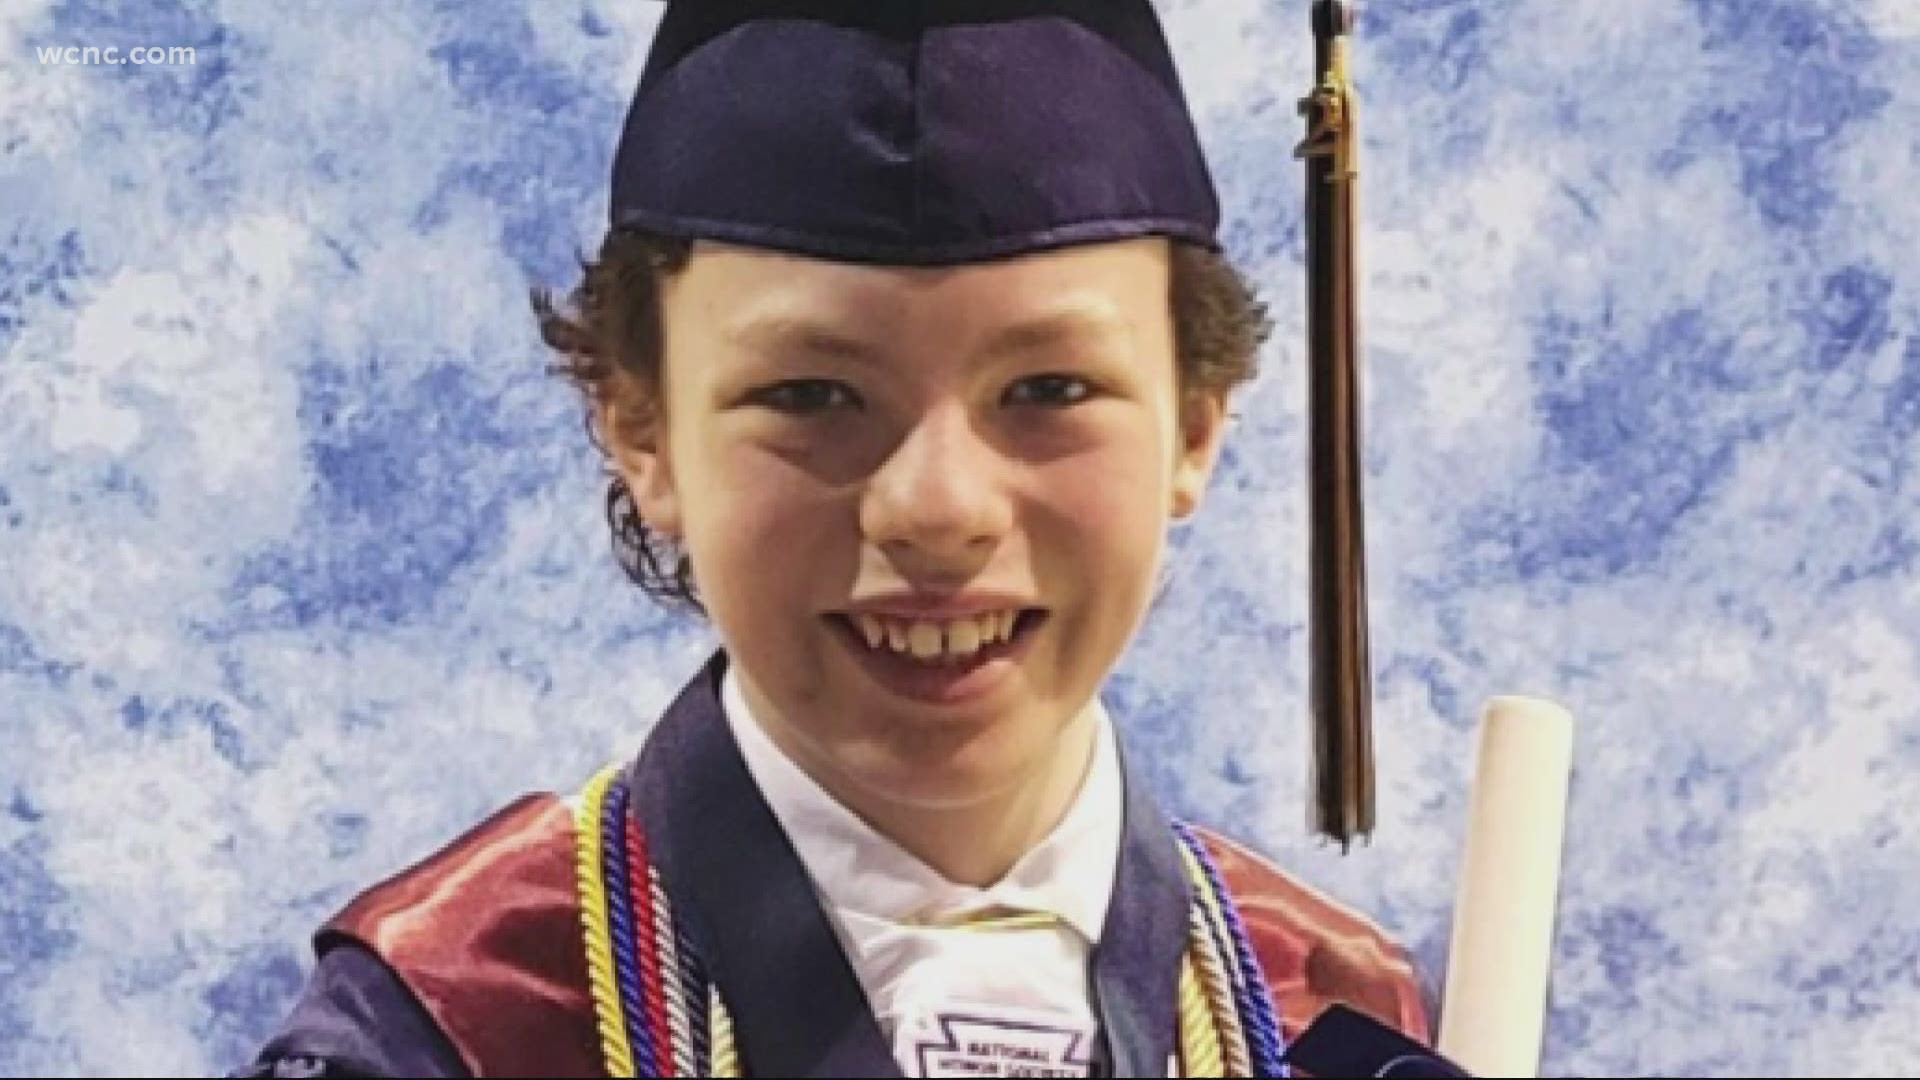 Mike Wimmer is just 12 years old, but he's already set to graduate from college with a perfect GPA, all while finishing high school at the top of his class.